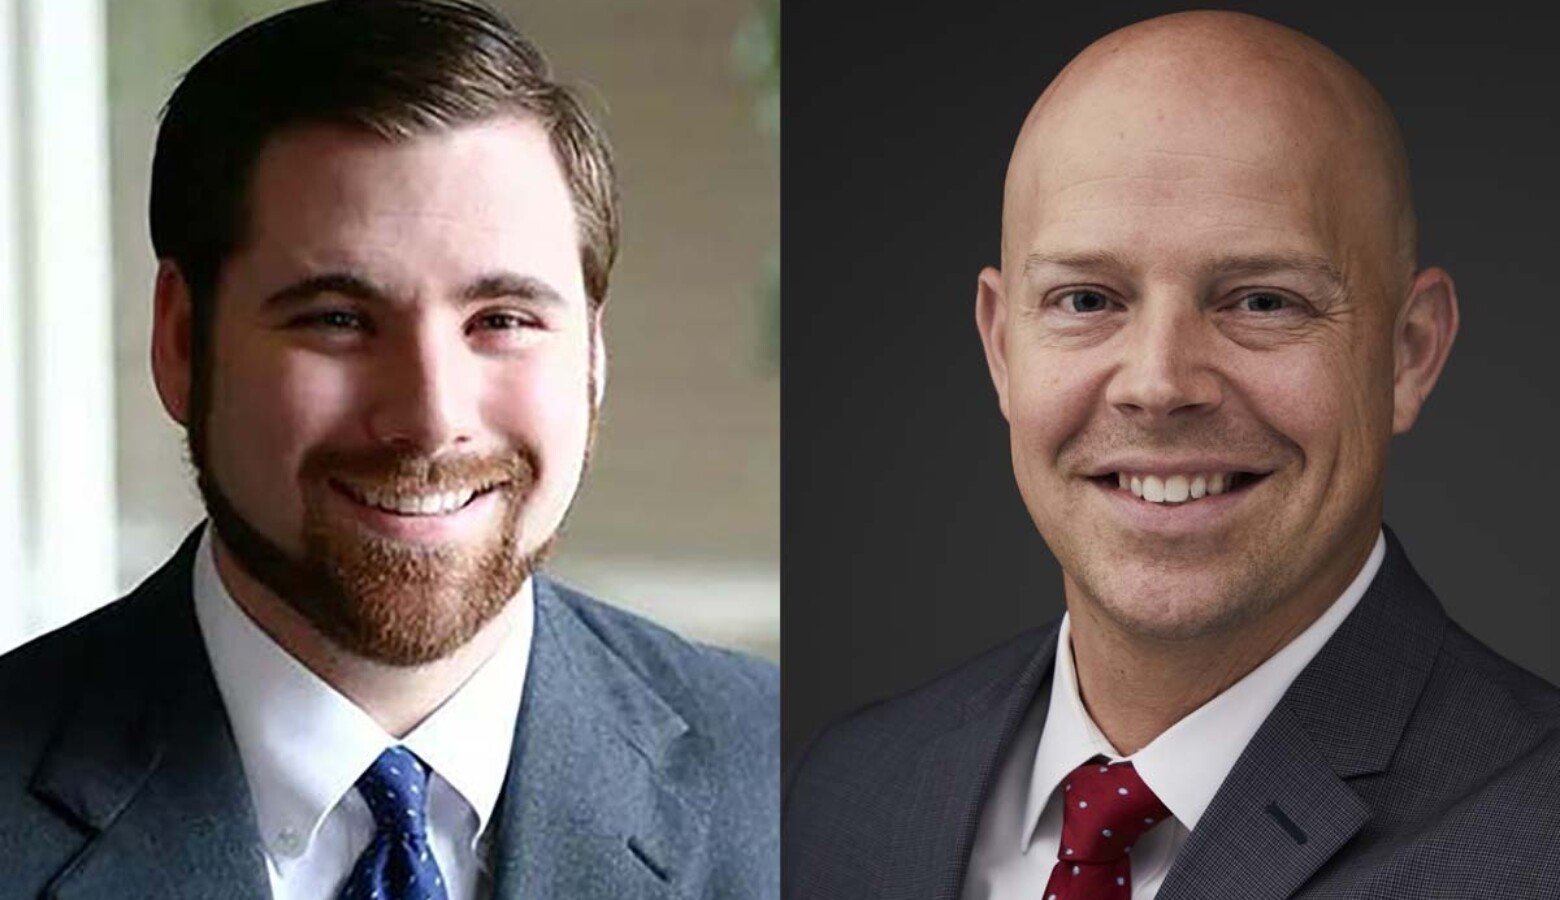 Decatur County Prosecutor Nate Harter, left, joined the Republican race for the Attorney General nomination as former Indiana Department of Revenue Commissioner Adam Krupp, right, dropped out and endorsed Harter. (Courtesy of Indiana Prosecuting Attorneys